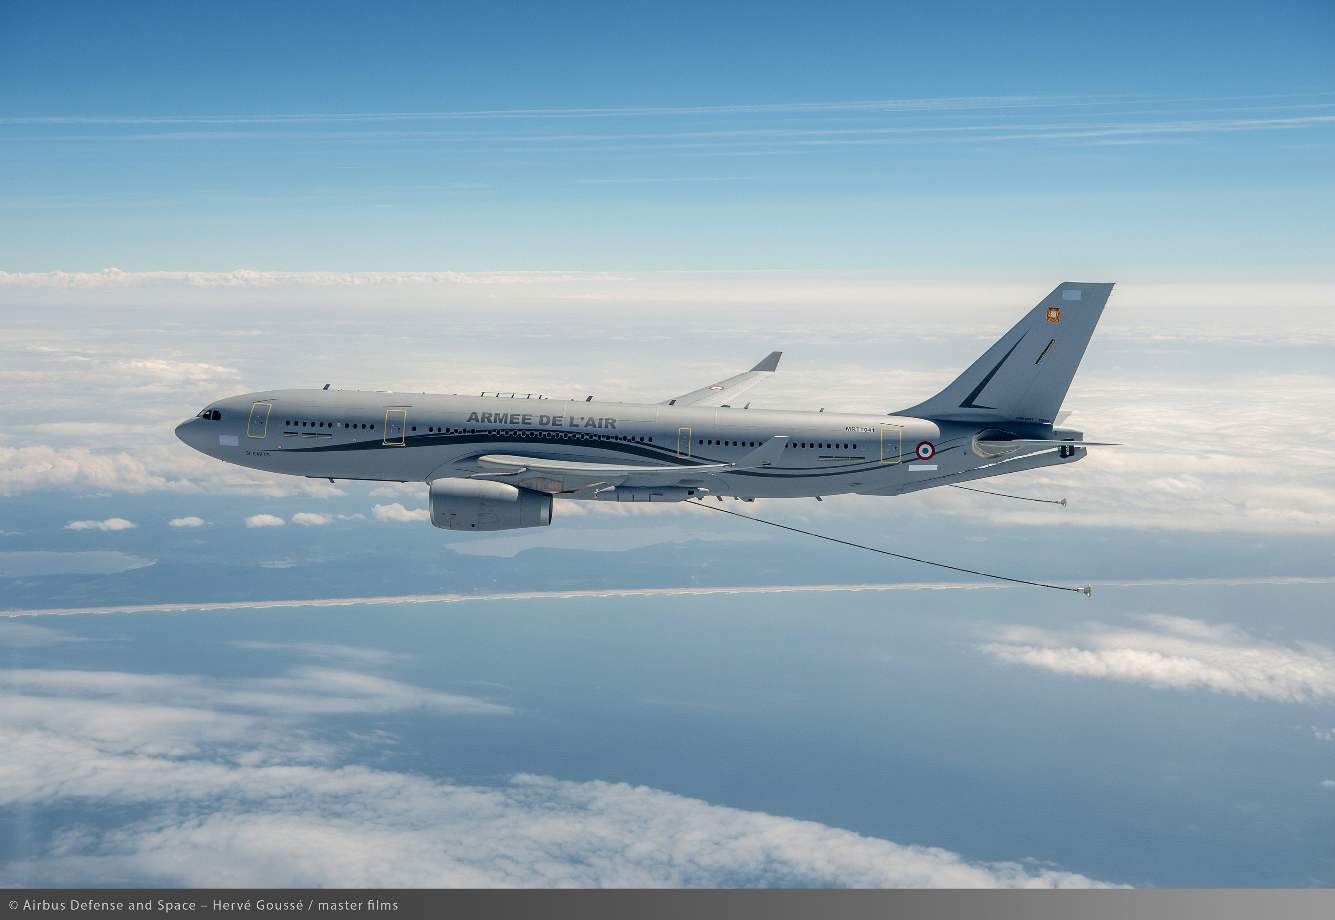 France orders three more Airbus A330 MRTT tankers